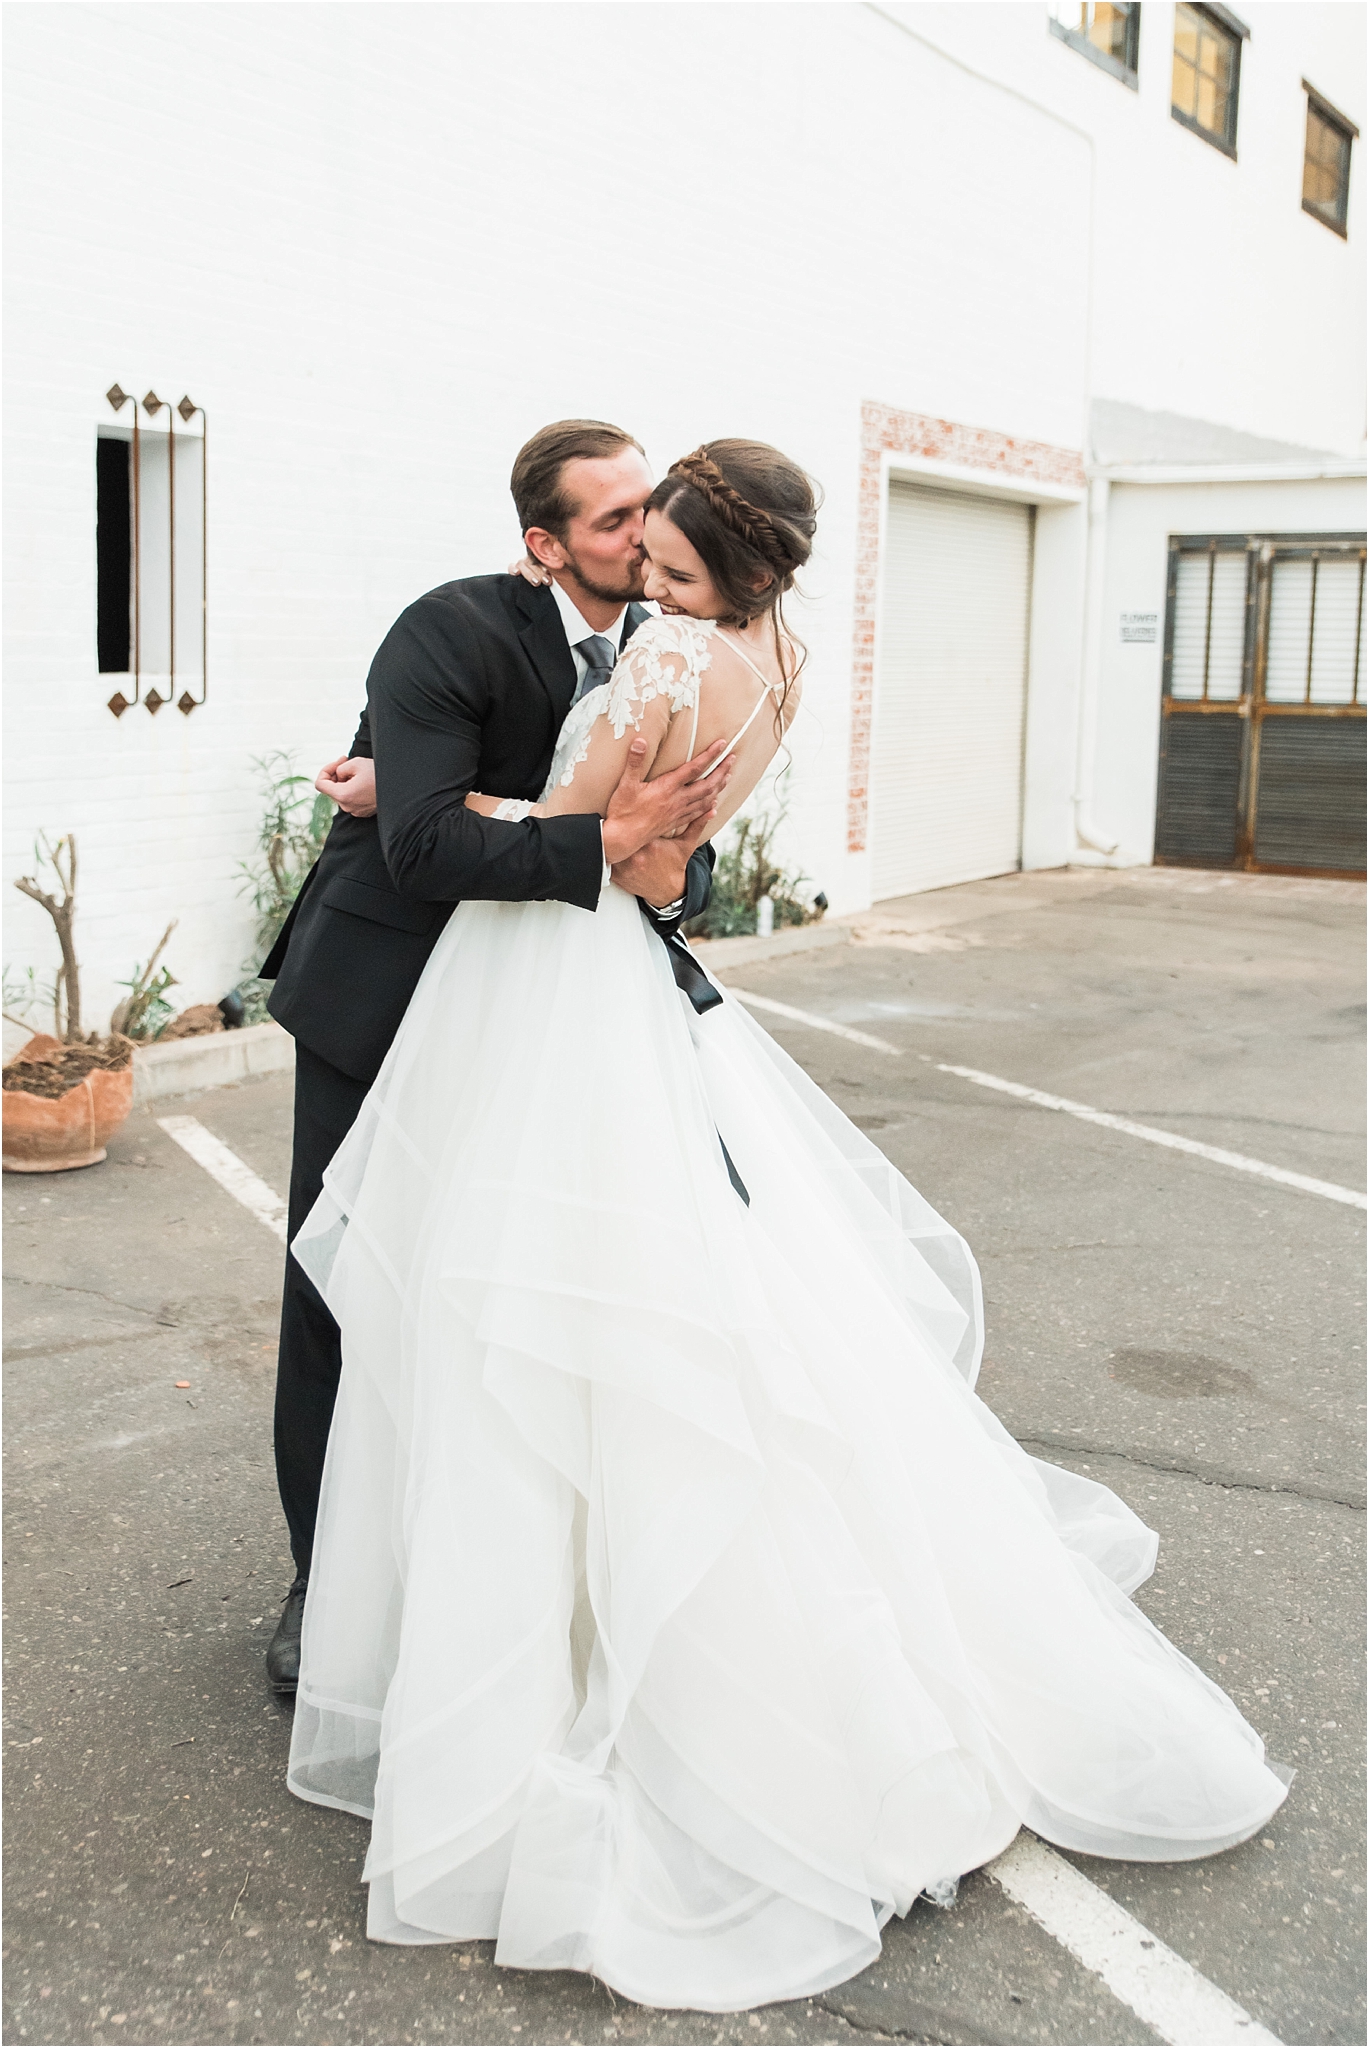 Bride and Groom snuggle and kiss during a wedding | Tucson Wedding Photographer | Bryan & Anh of West End Photography